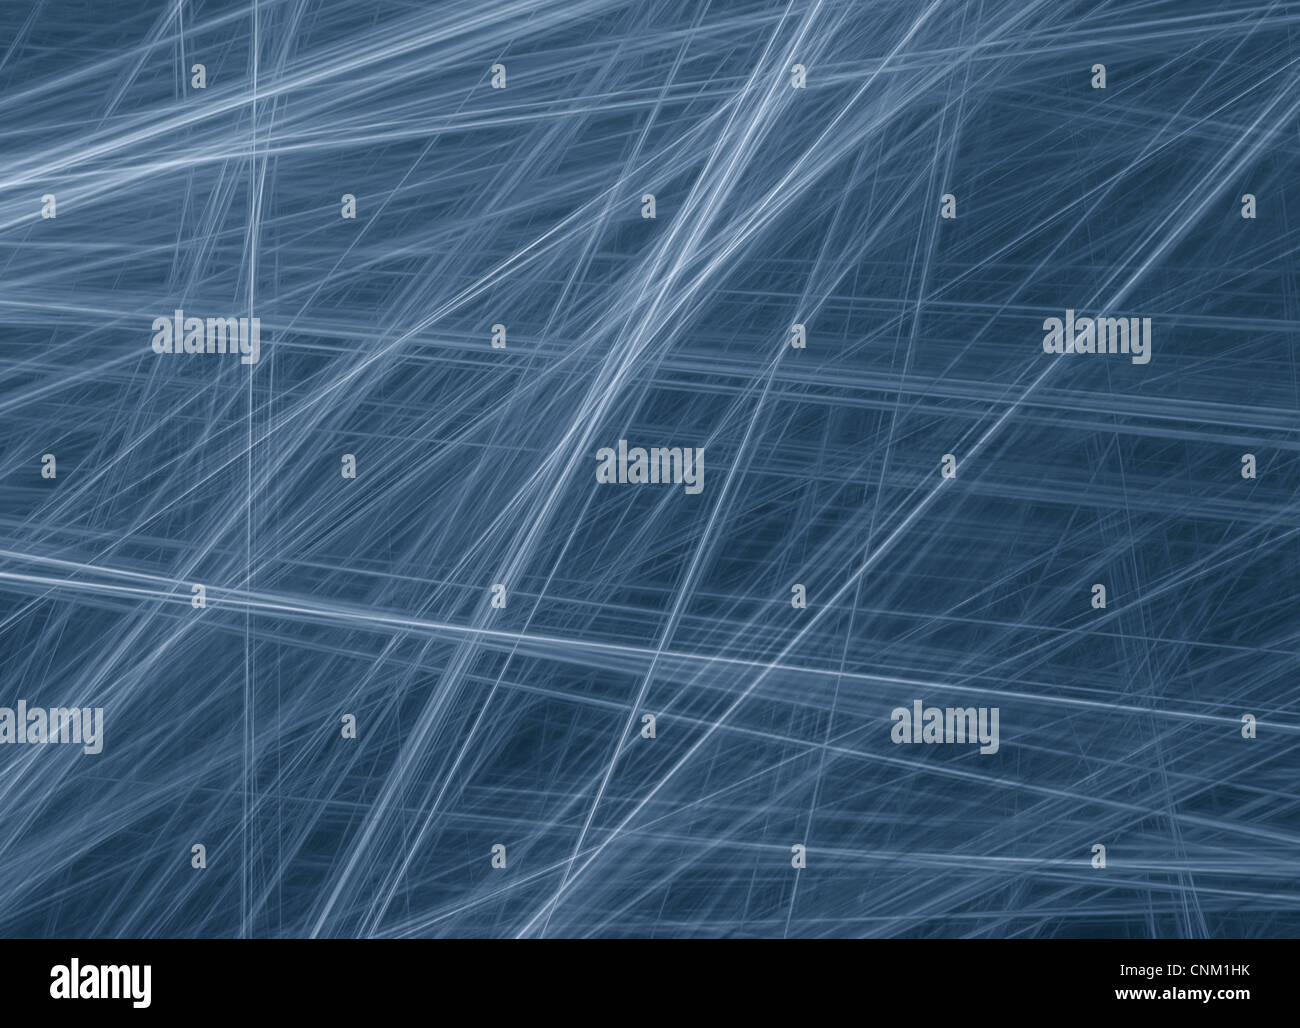 Abstract fibers background. Blue tint. Stock Photo